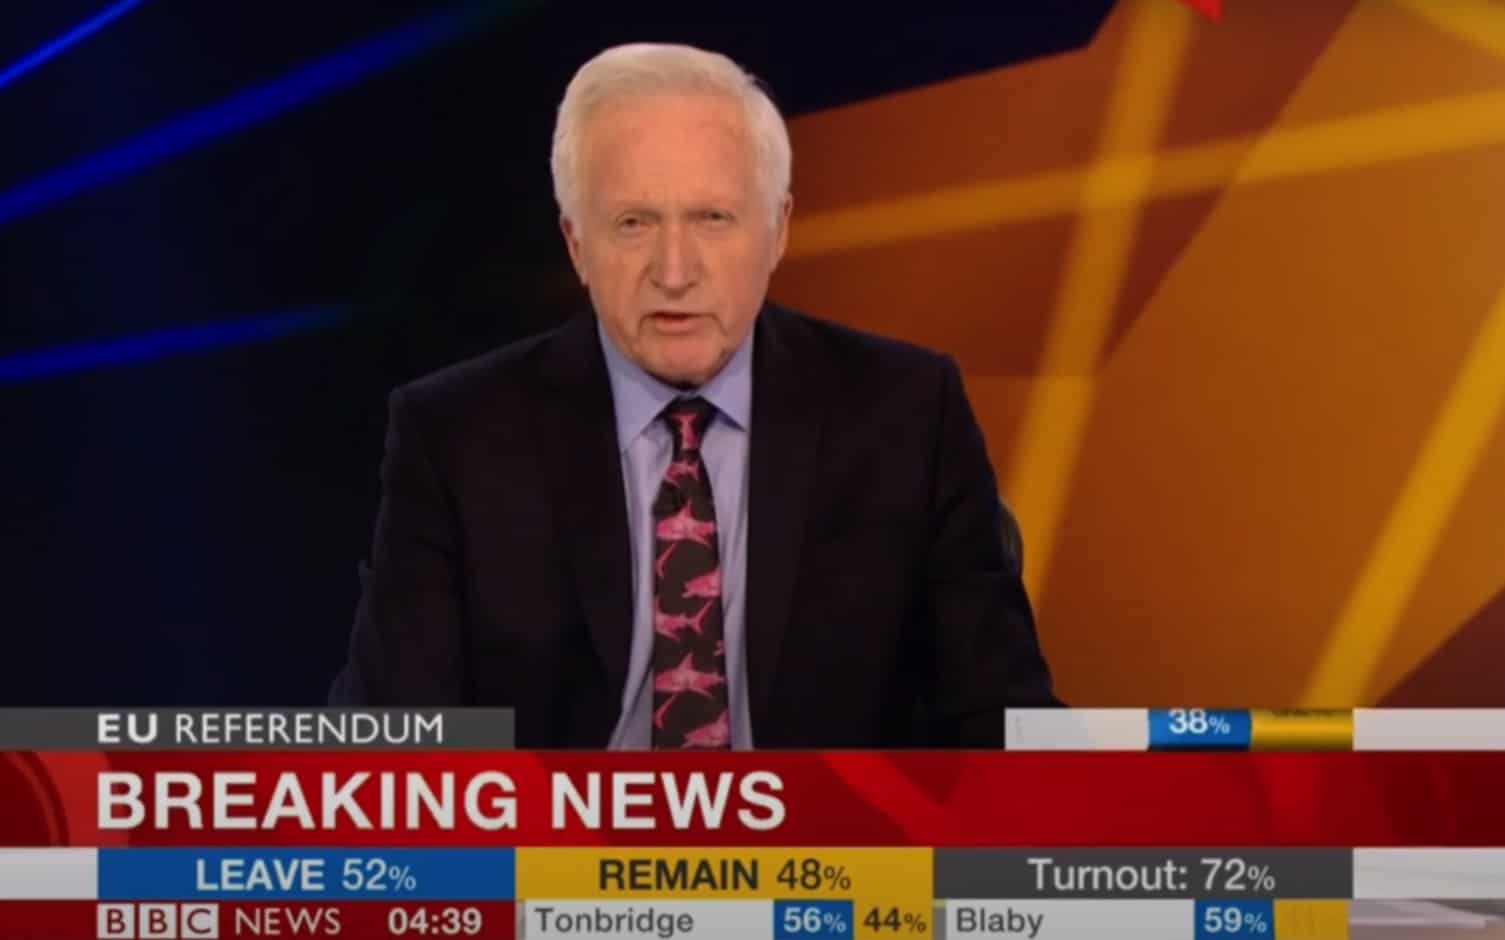 David Dimbleby recalls the ‘difficult’ moment he announced the Brexit referendum result